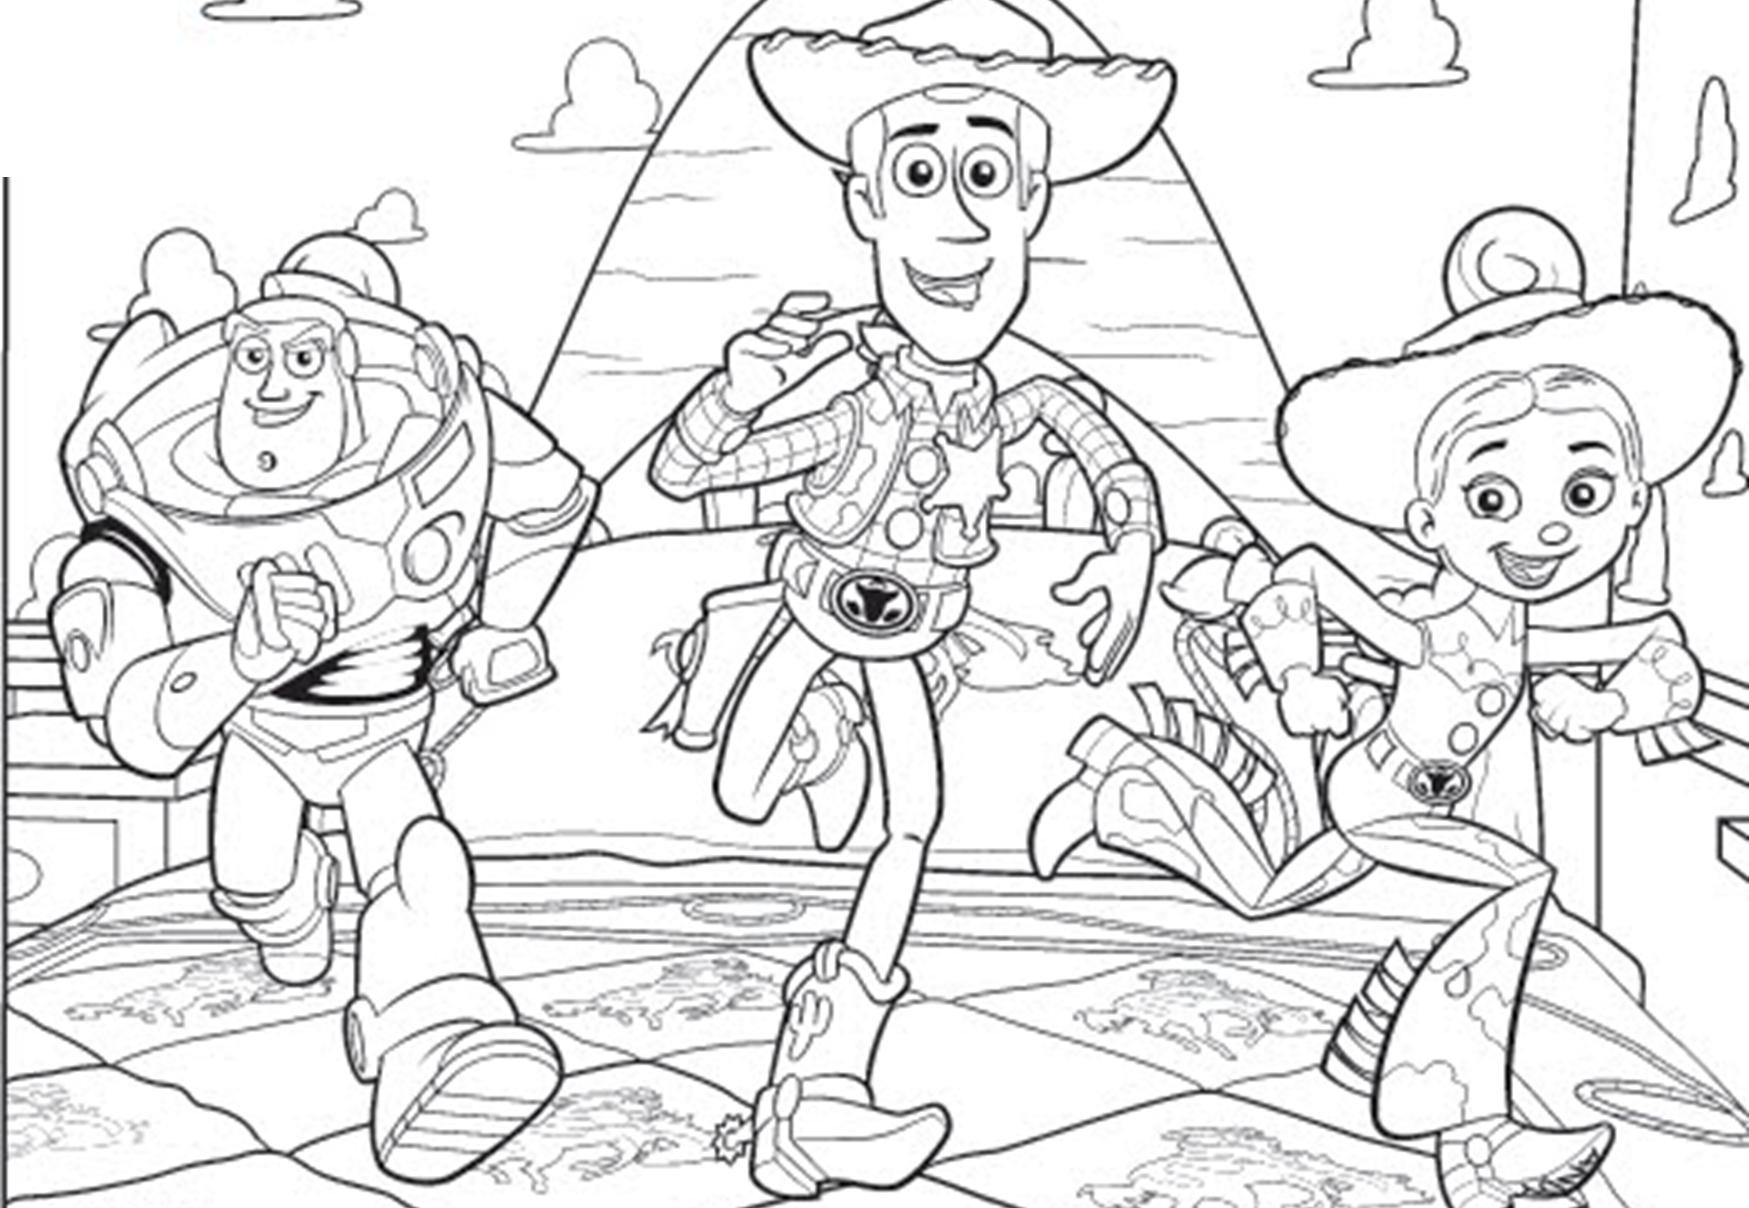 my story animated coloring pages